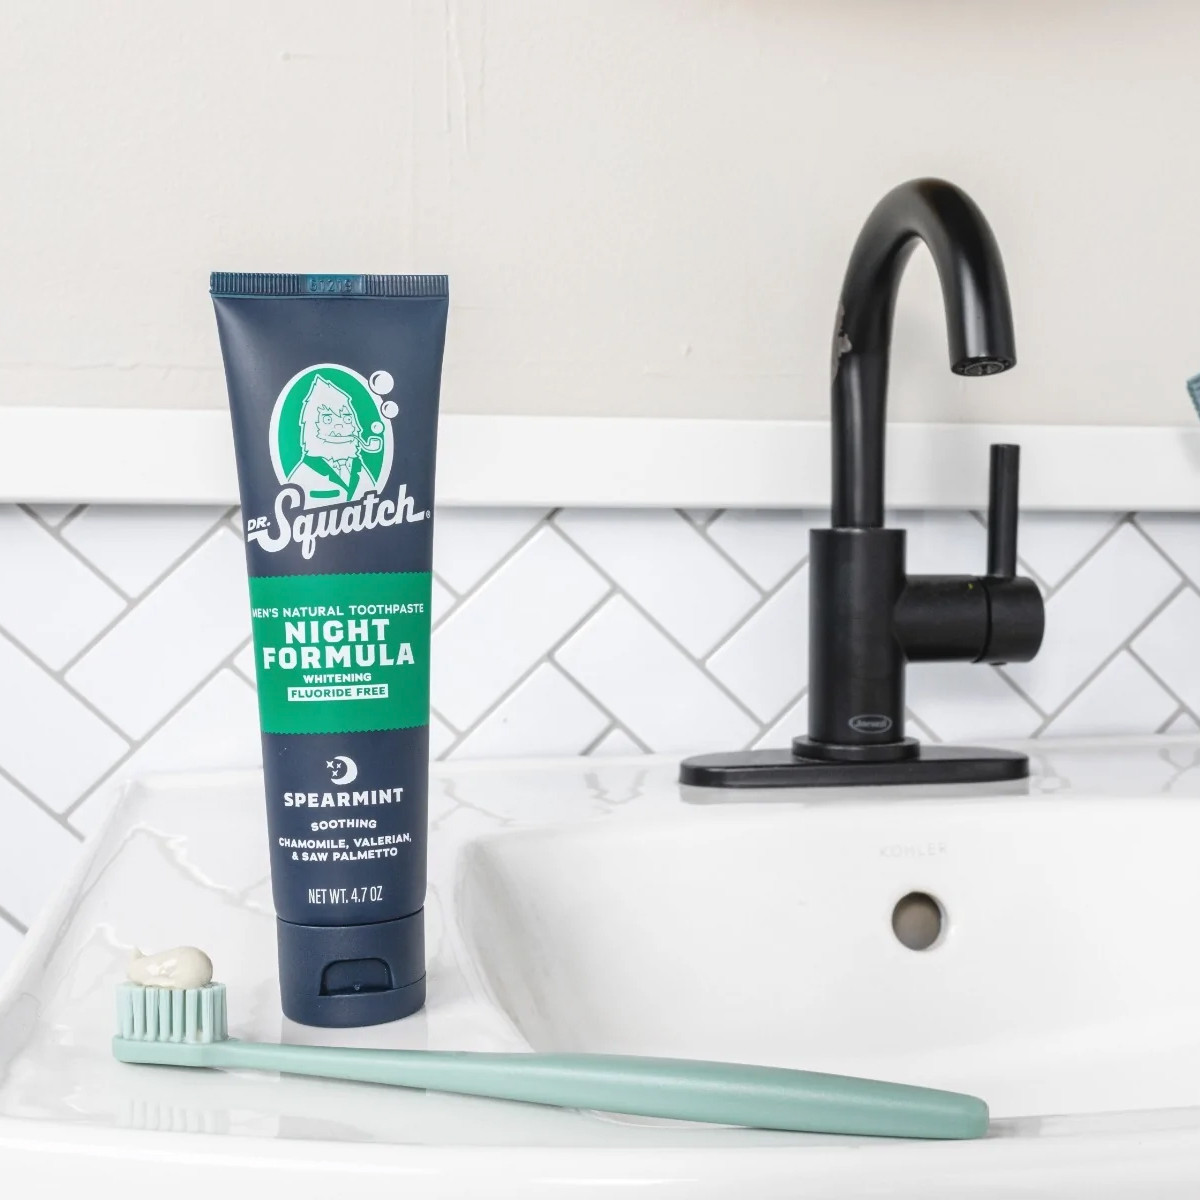 https://cdn11.bigcommerce.com/s-nkdwo8ulw8/products/11254/images/15642/131110_Toothpaste-Soothing-Spearmint-PROMO__69243.1667844735.1280.1280.jpg?c=2